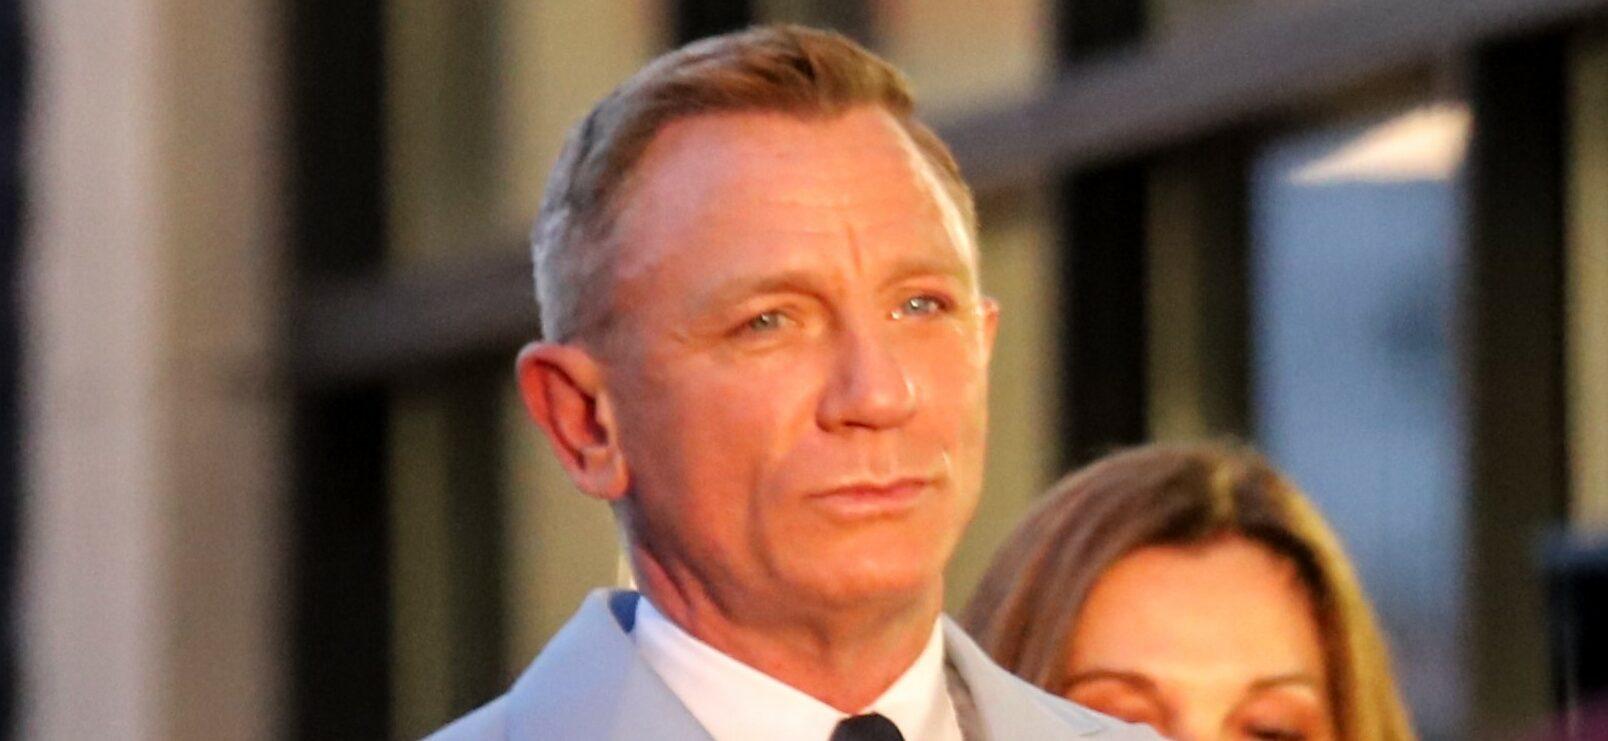 Daniel Craig Follows In James Bond’s Step To Receive Royal CMG Honor From Princess Anne